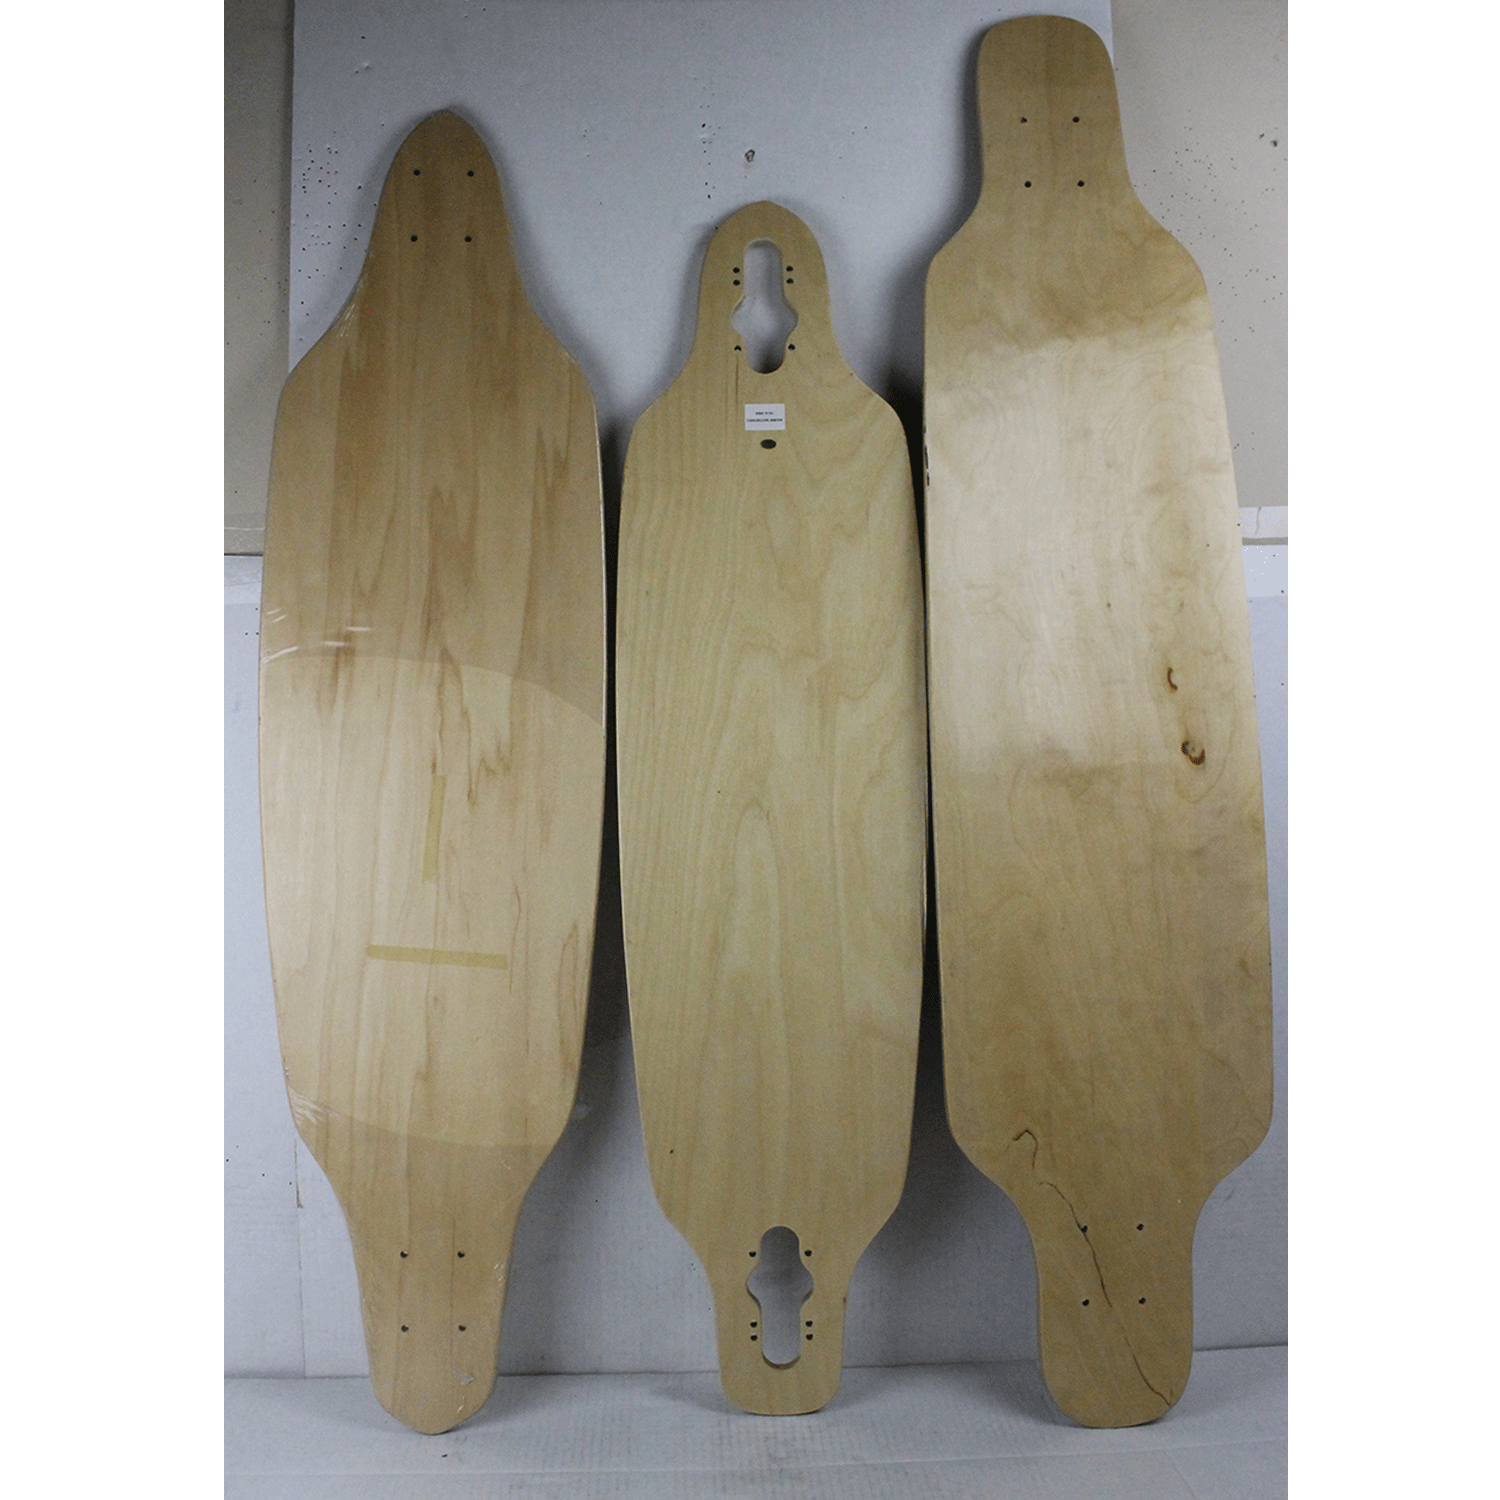 Blemished Longboard Decks 10" X 39" Natural/ 9.5" X 32" Stain Yellow/ 9" X 36"